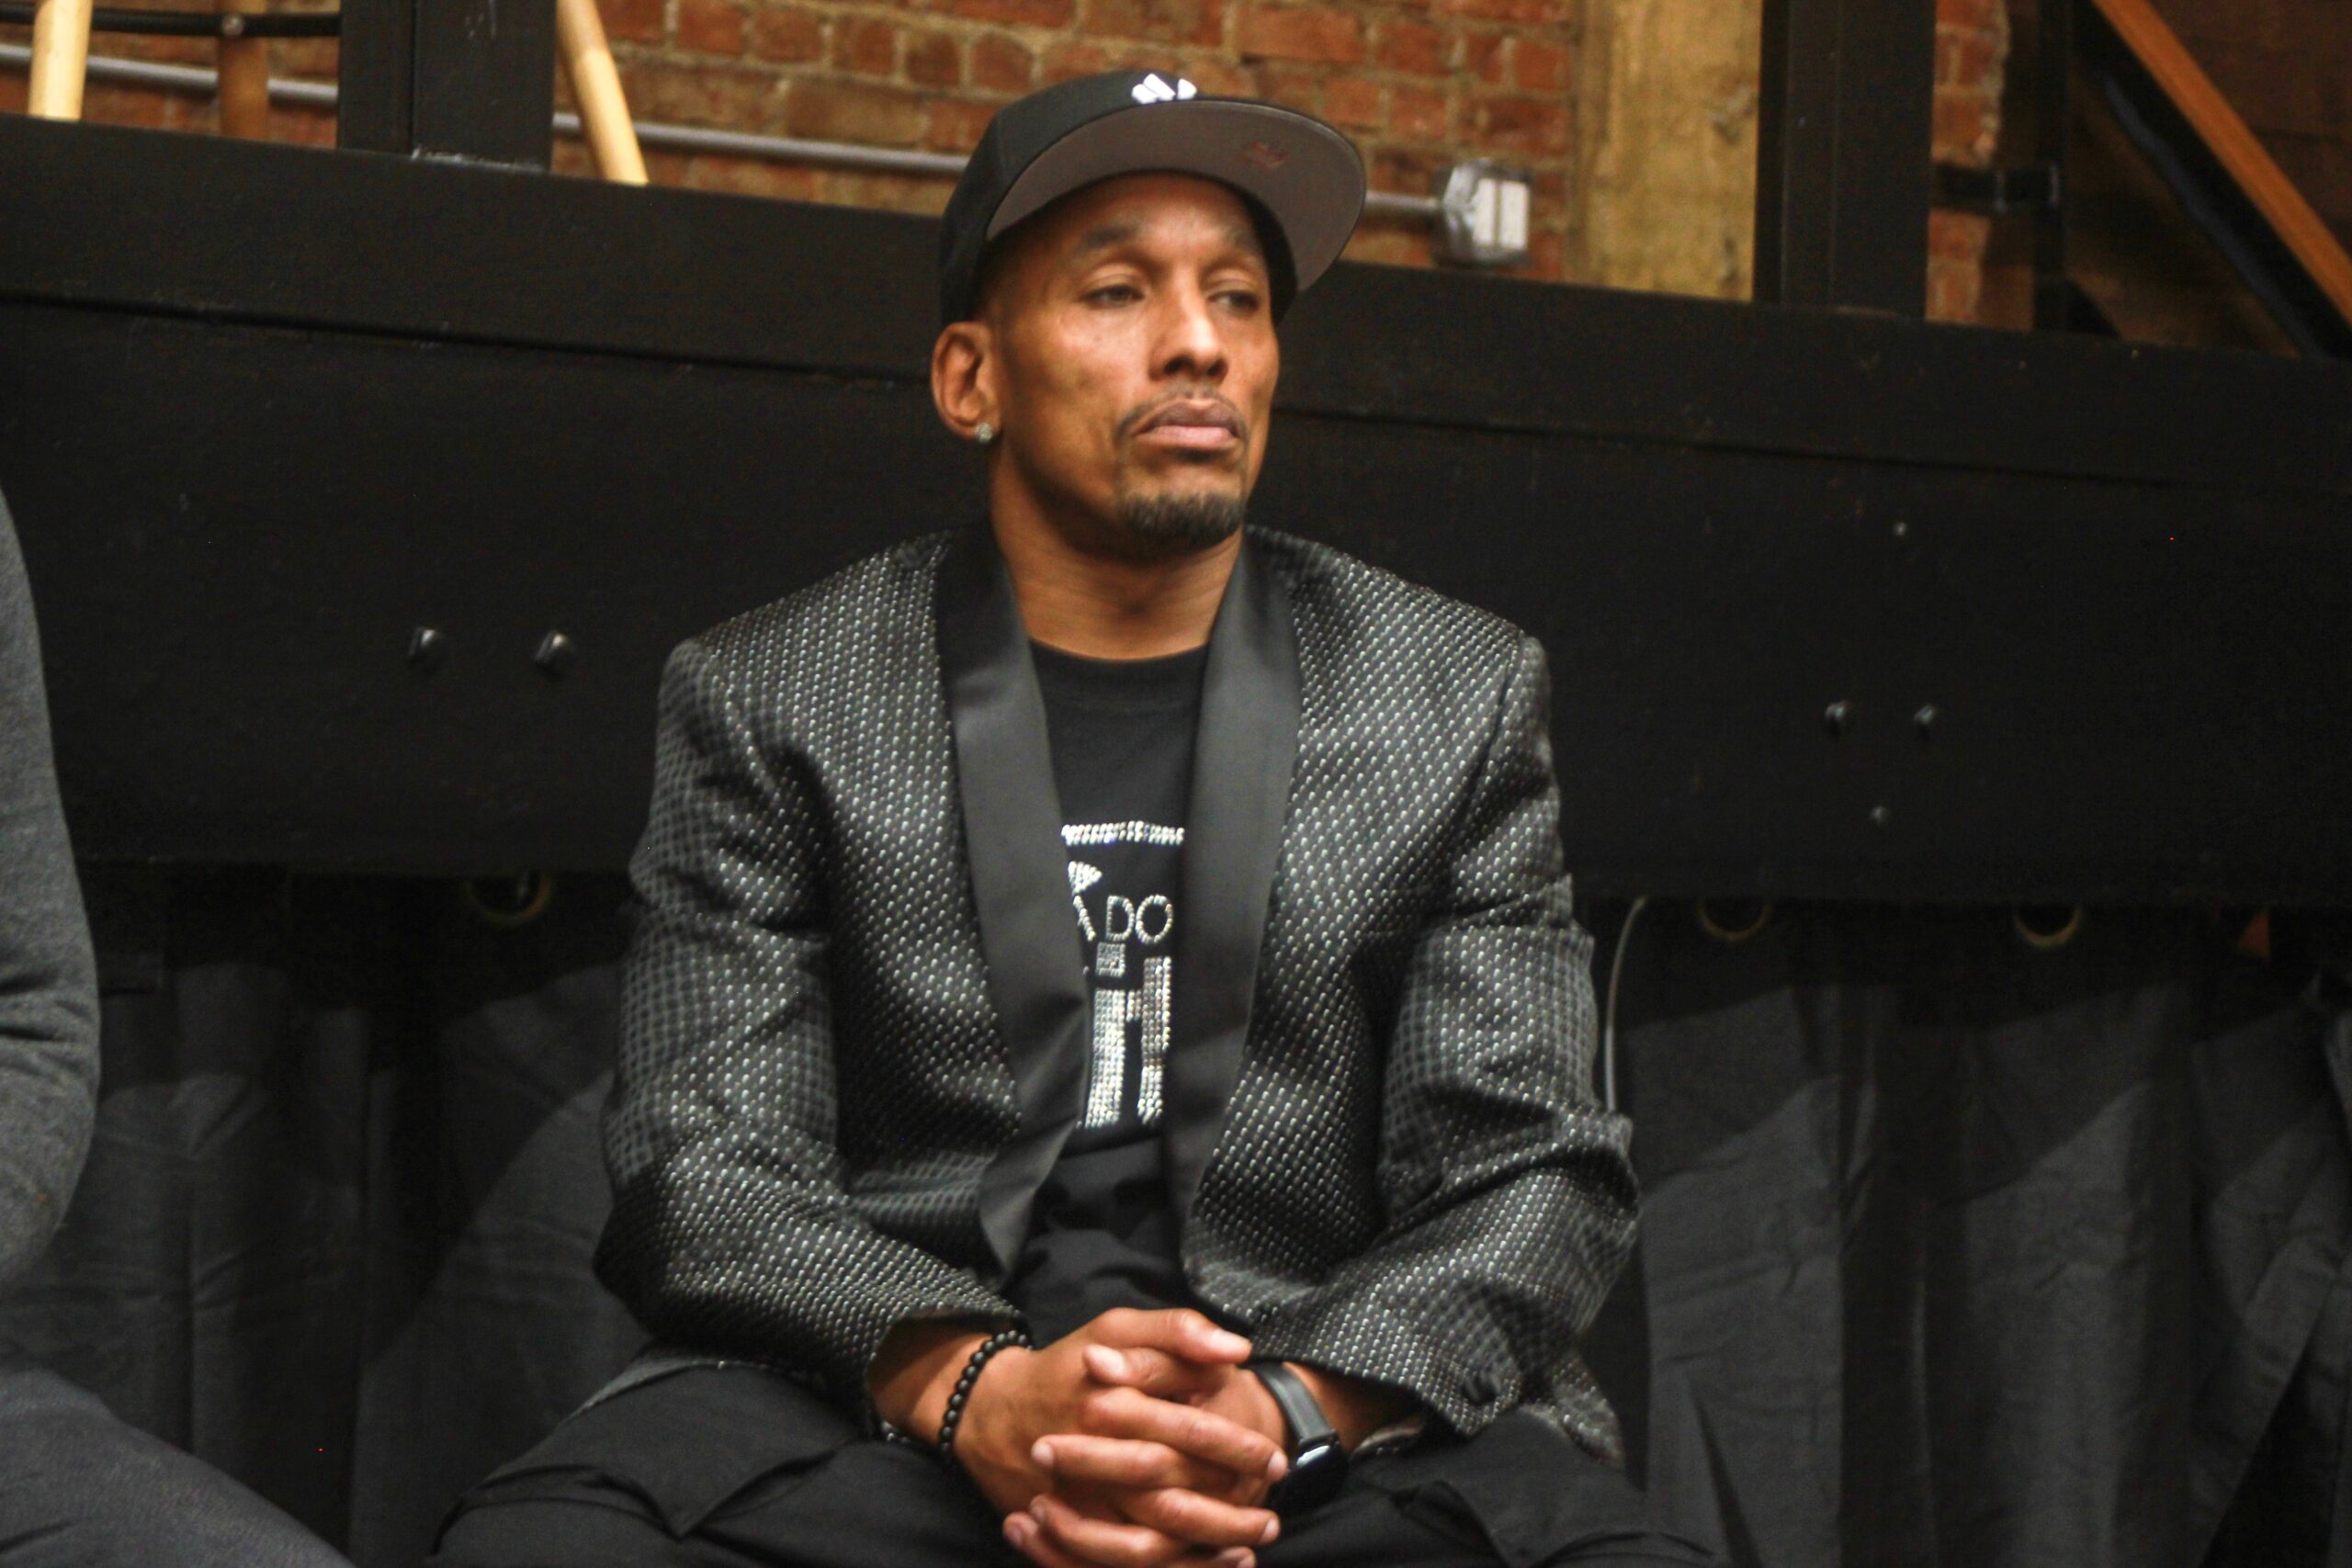 Korey Wise is Working on his Own Clothing Line